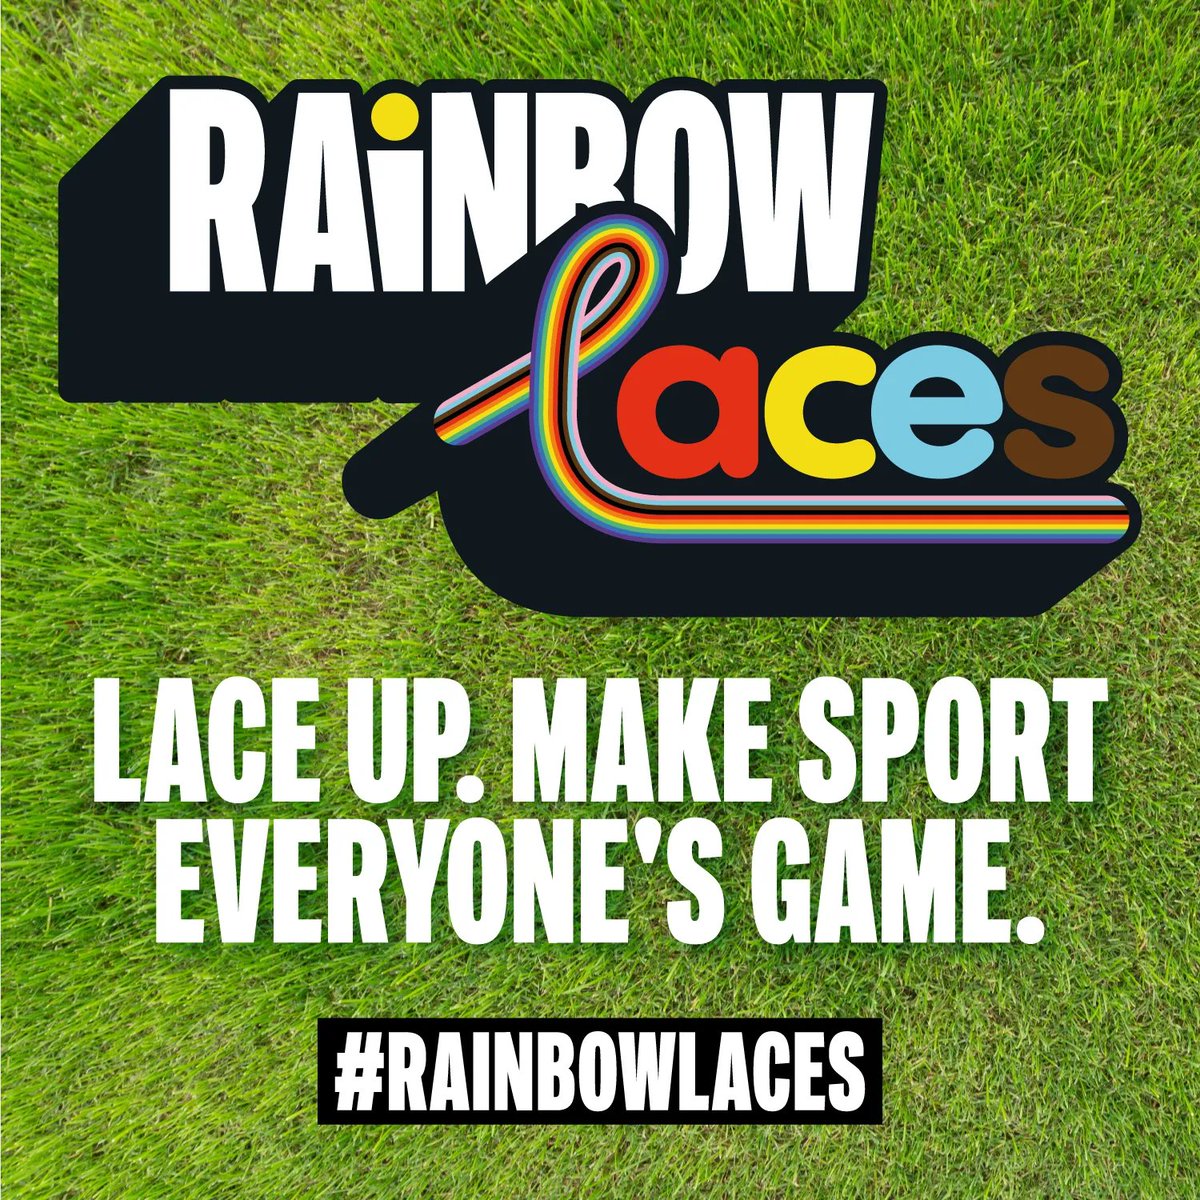 TODAY is the main activation day for #RainbowLaces! Thank you to everyone who has supported the campaign so far. Let's continue to lace up and speak up 👍